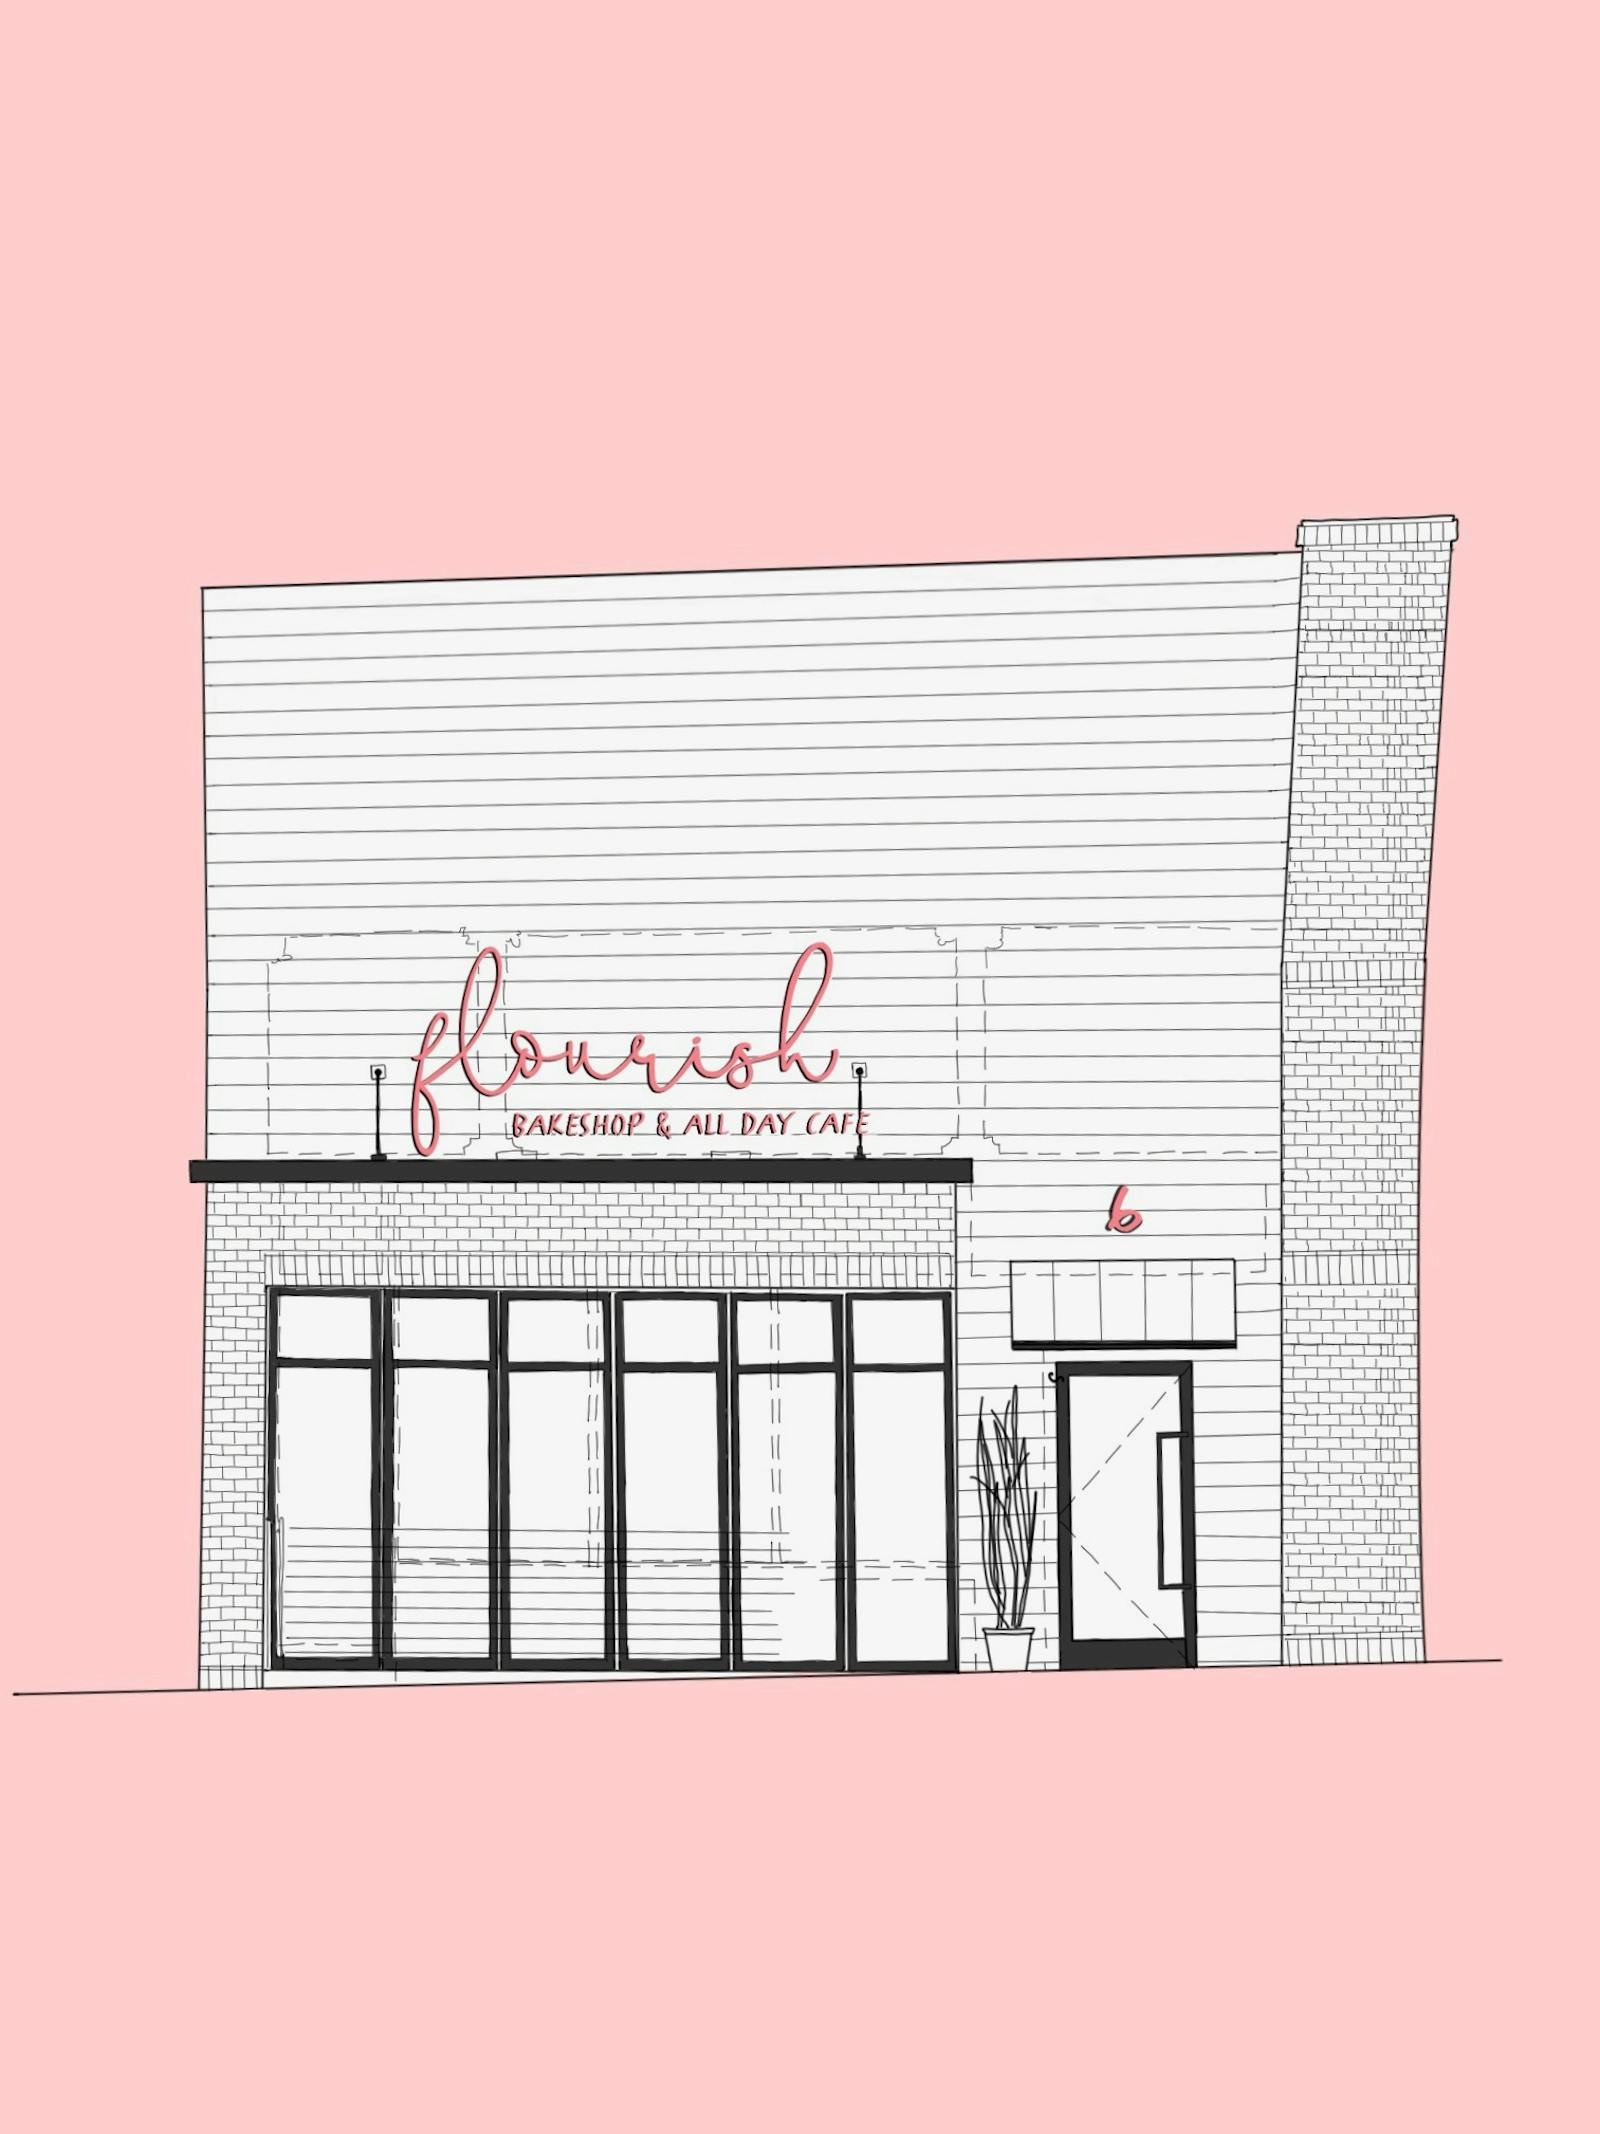 COMING SUMMER 2021! Flourish Bakeshop & All Day Cafe! 